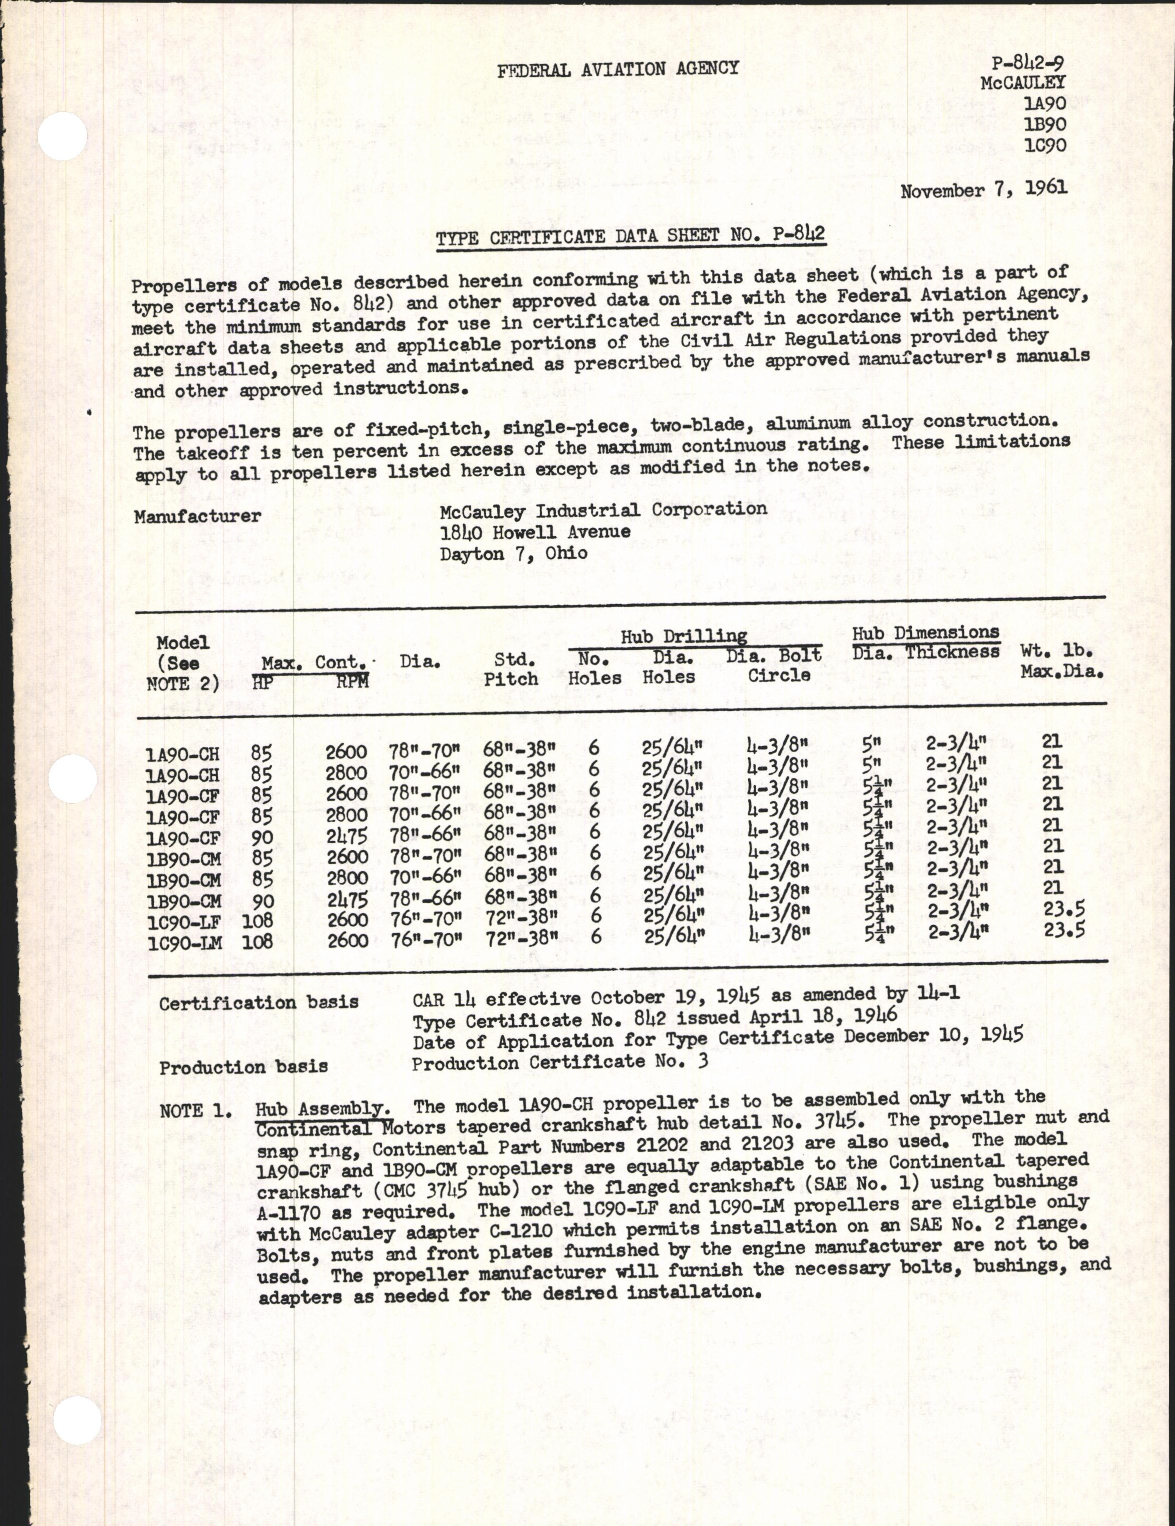 Sample page 1 from AirCorps Library document: 1A90, 1B90, and 1C90 - Type Certificate 